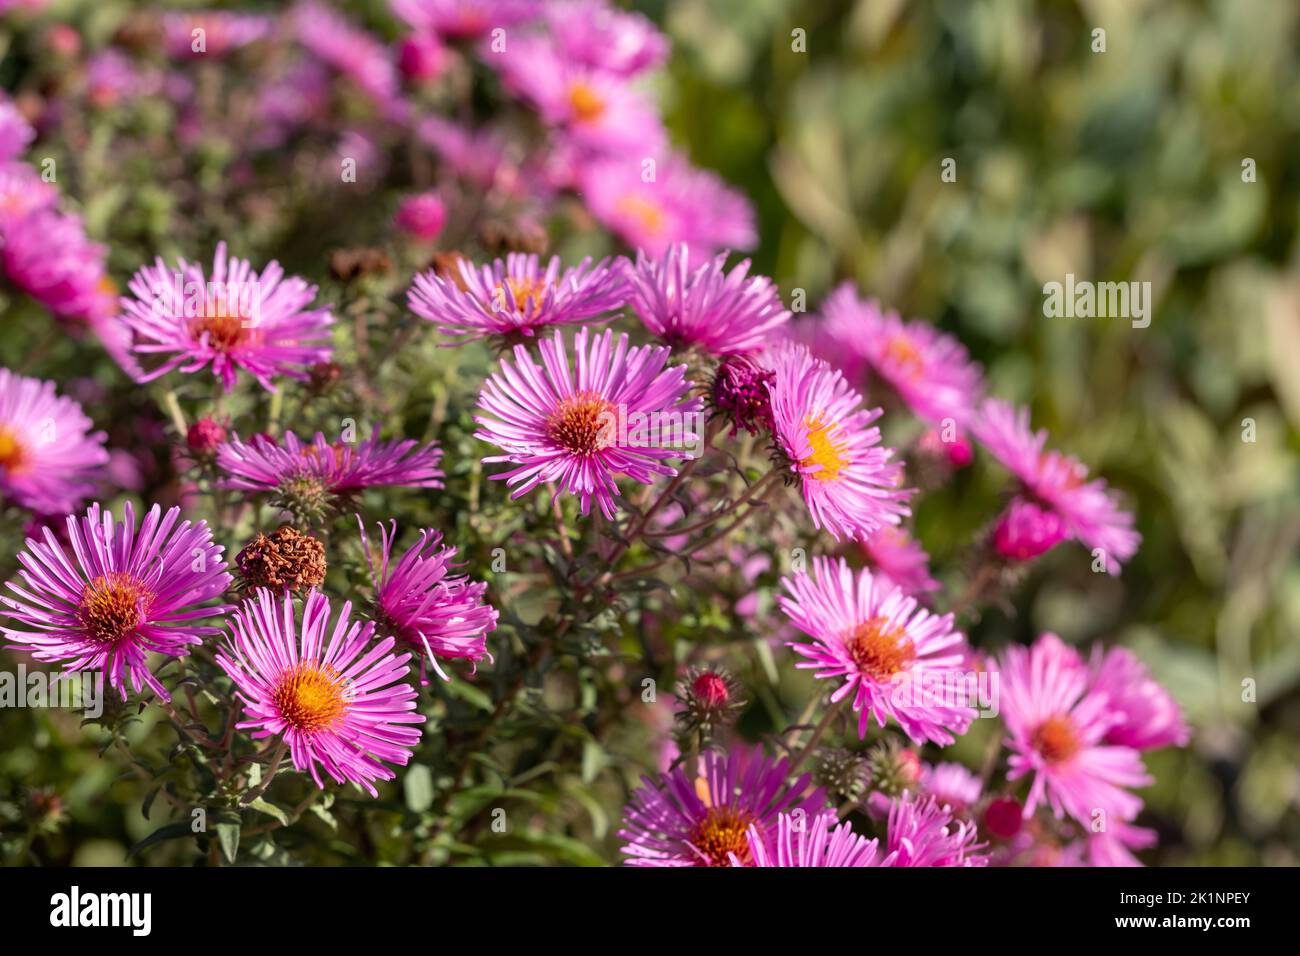 Stunning perennial autumn flowering pink asters. Photographed on a sunny day in September at RHS Wisley garden, Surrey UK. Stock Photo